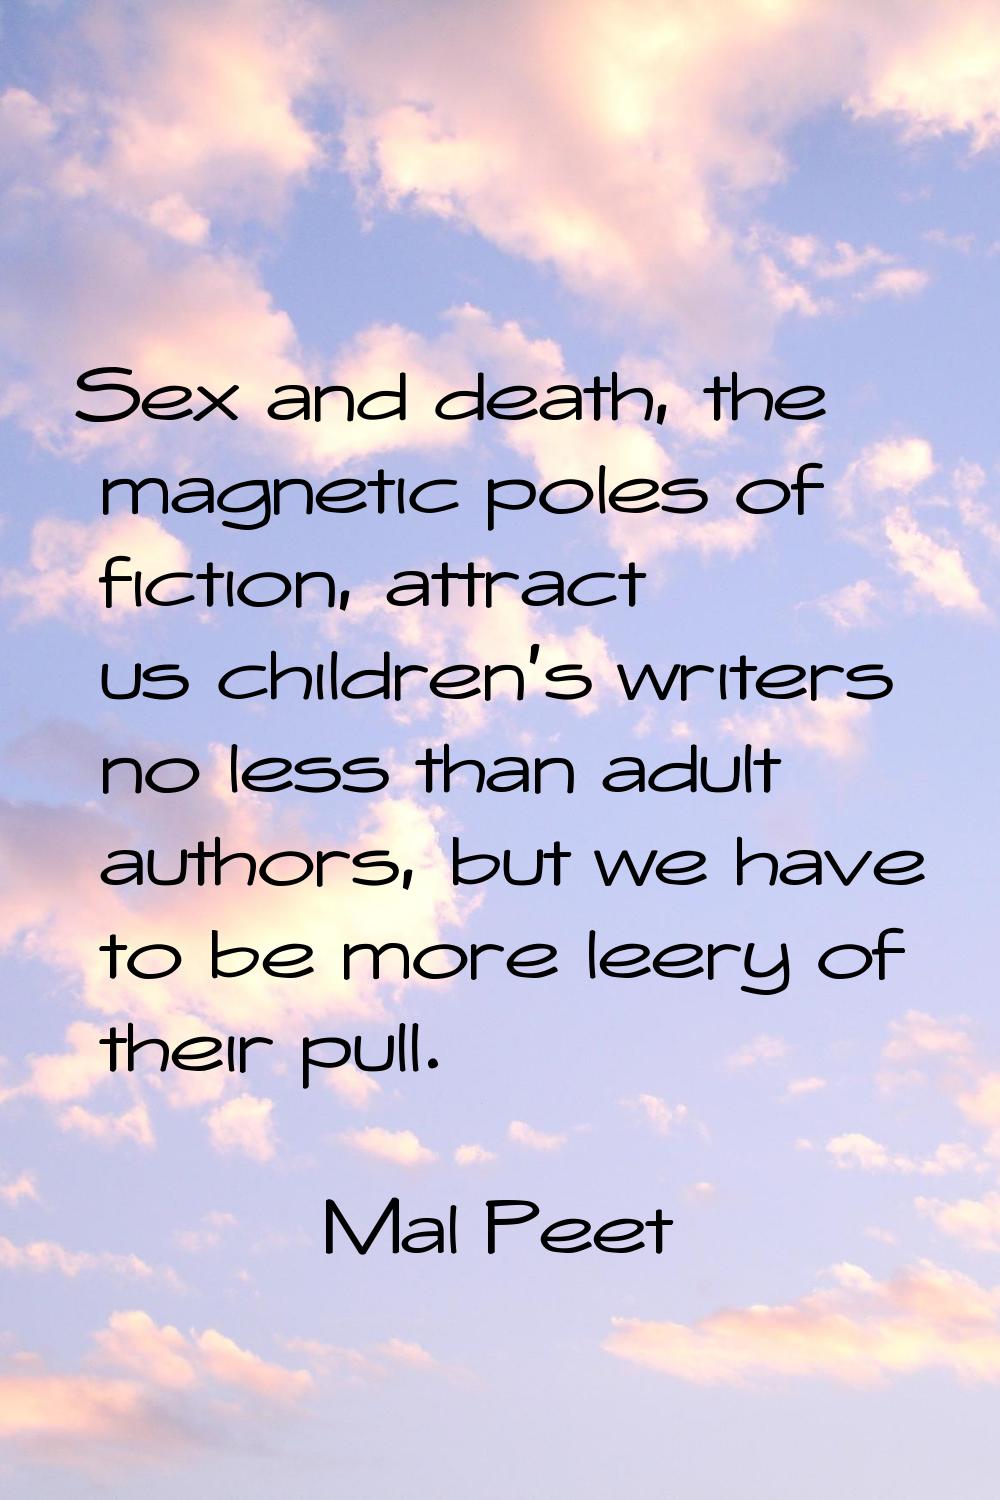 Sex and death, the magnetic poles of fiction, attract us children's writers no less than adult auth